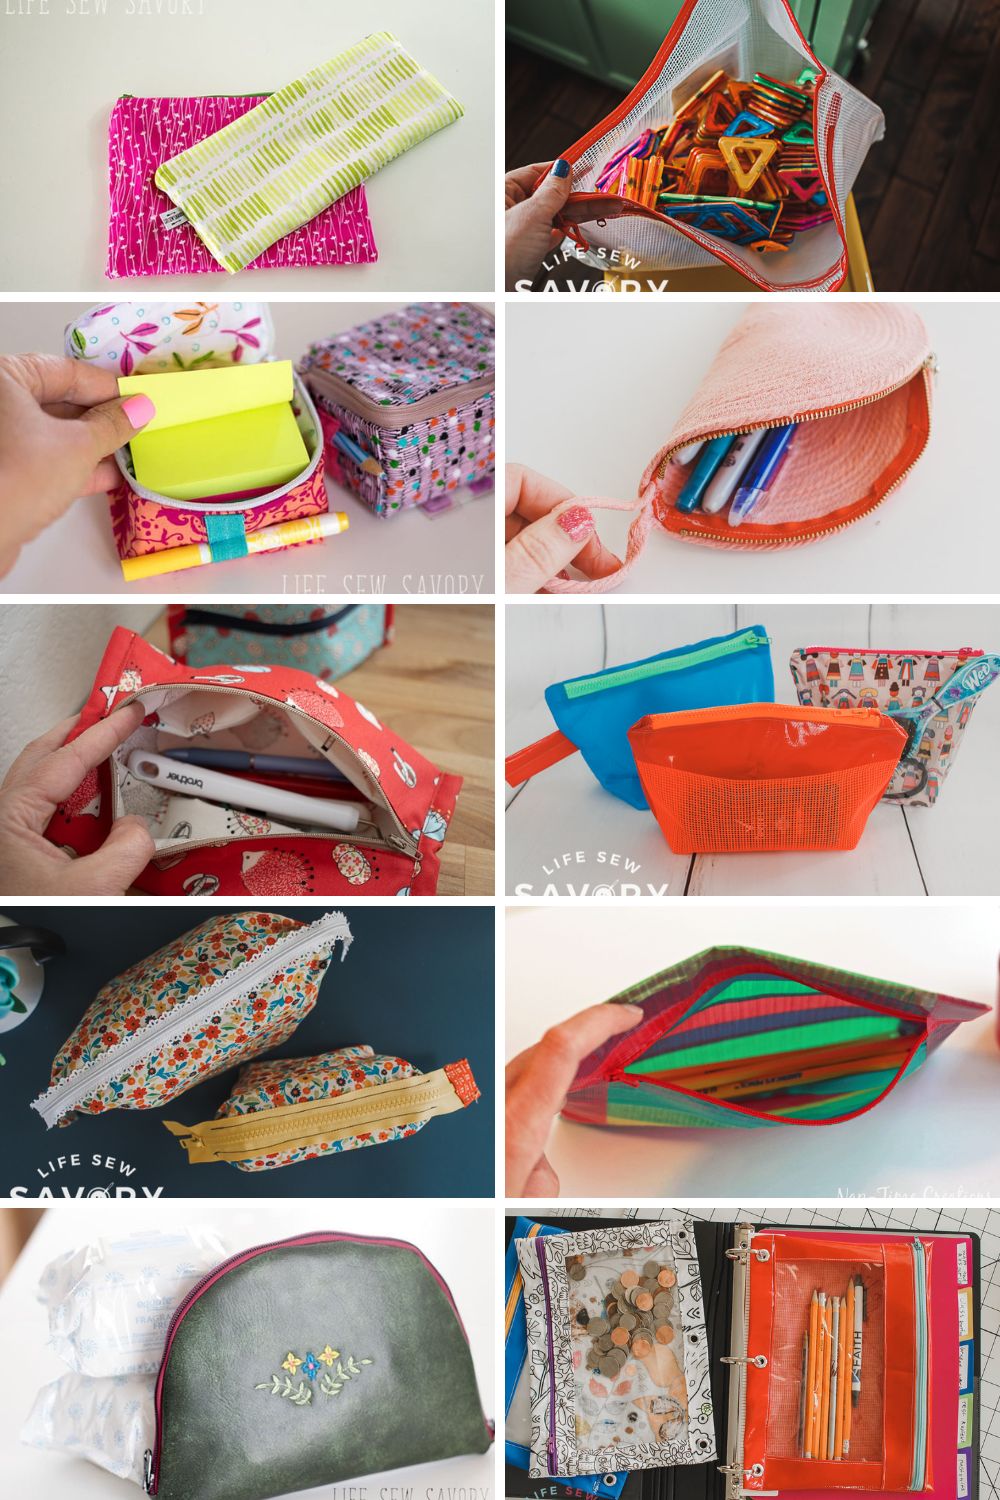 zippered pouches of all shapes and sizes to sew. Free sewing patterns and tutorials